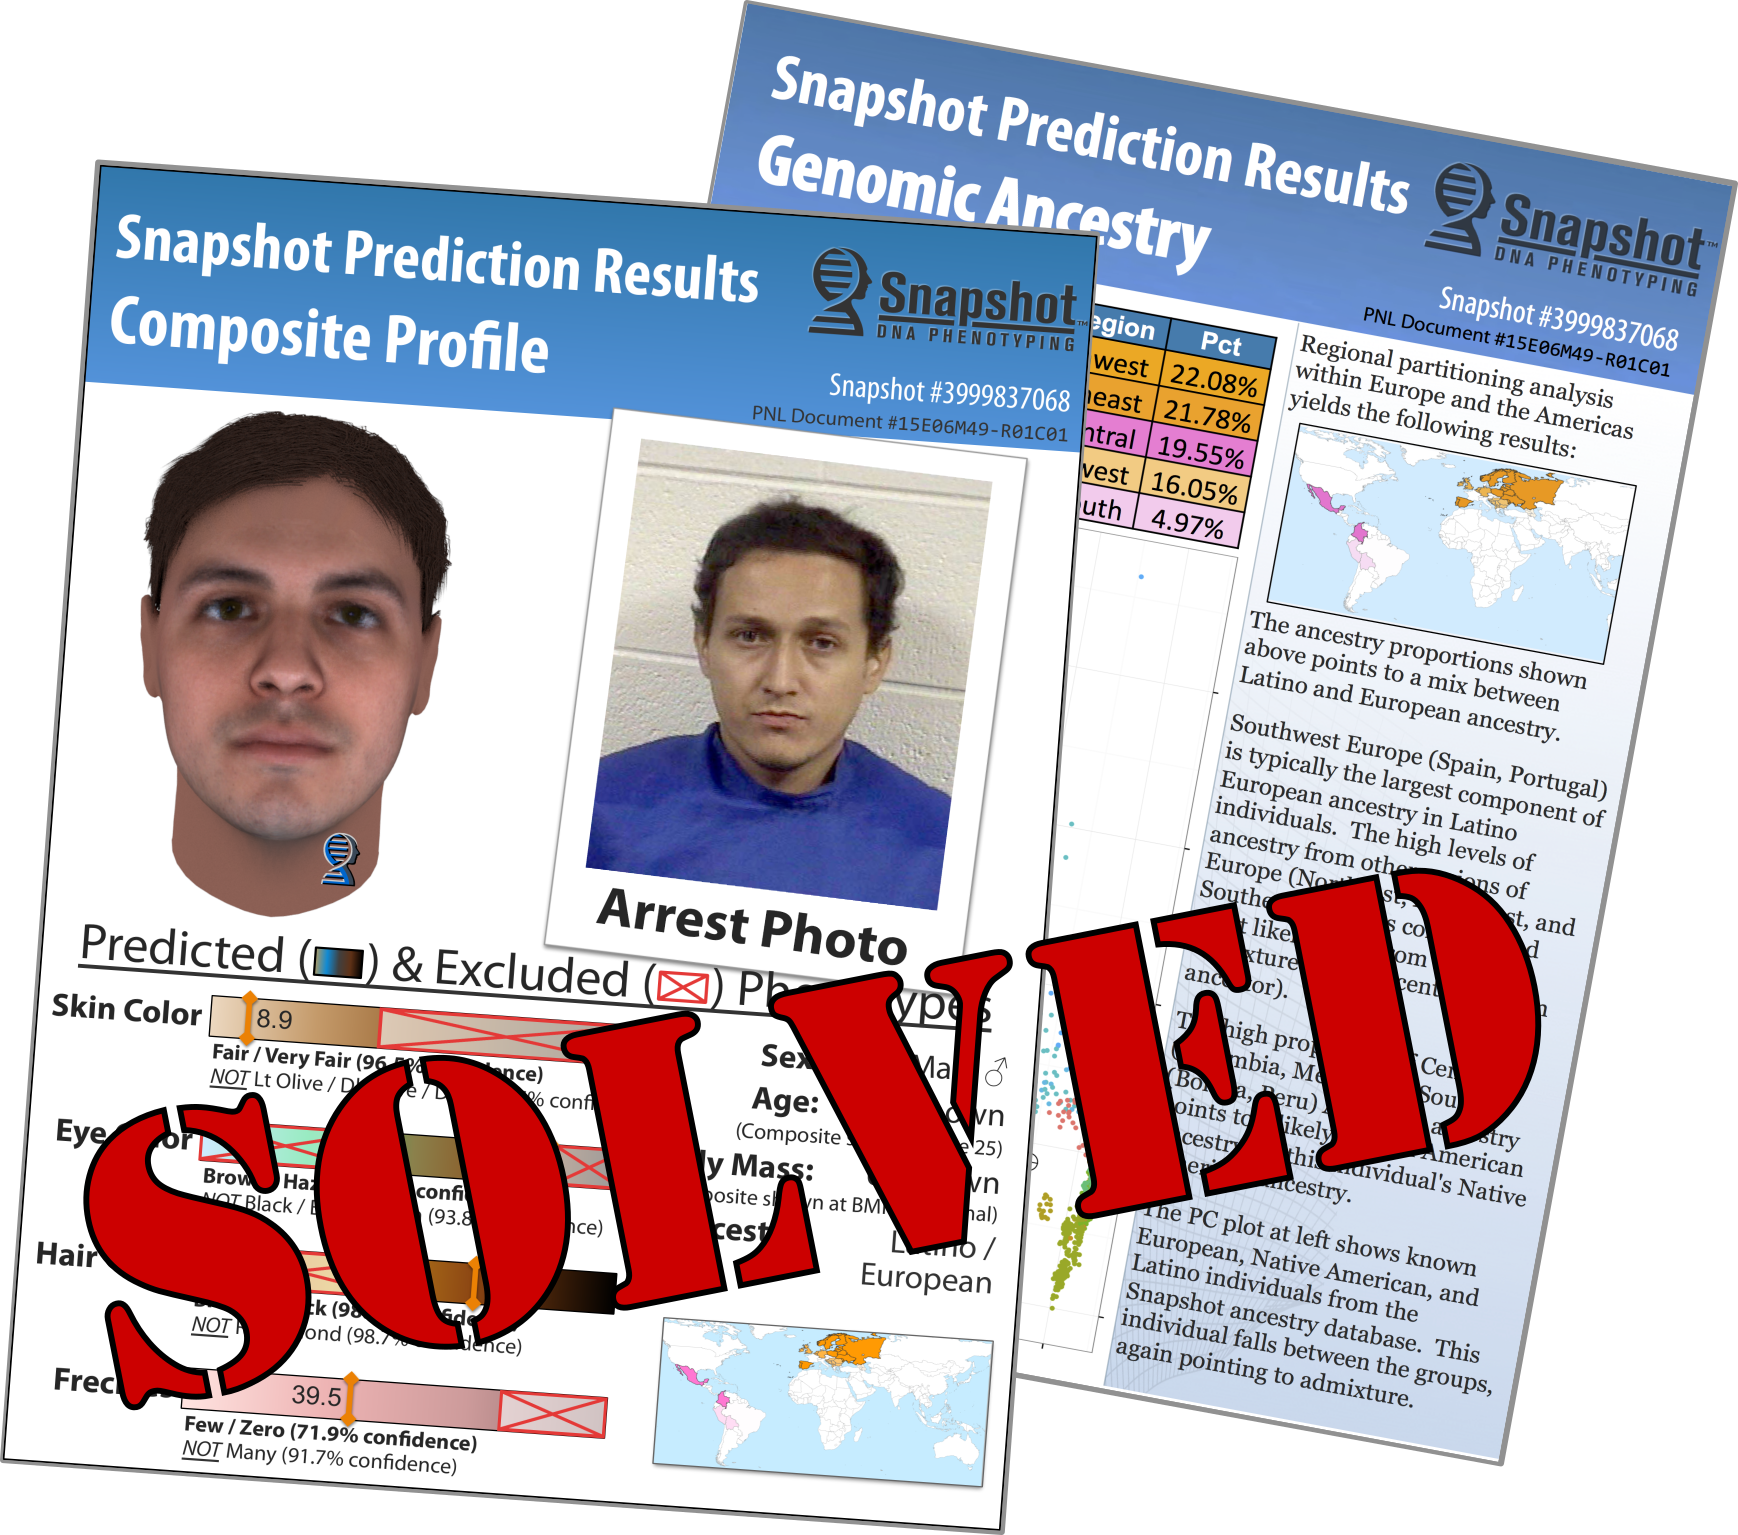 SOLVED: A comparison of the Snapshot Composite Profile and a photo of José Alvarez, Jr. taken at the time of his arrest